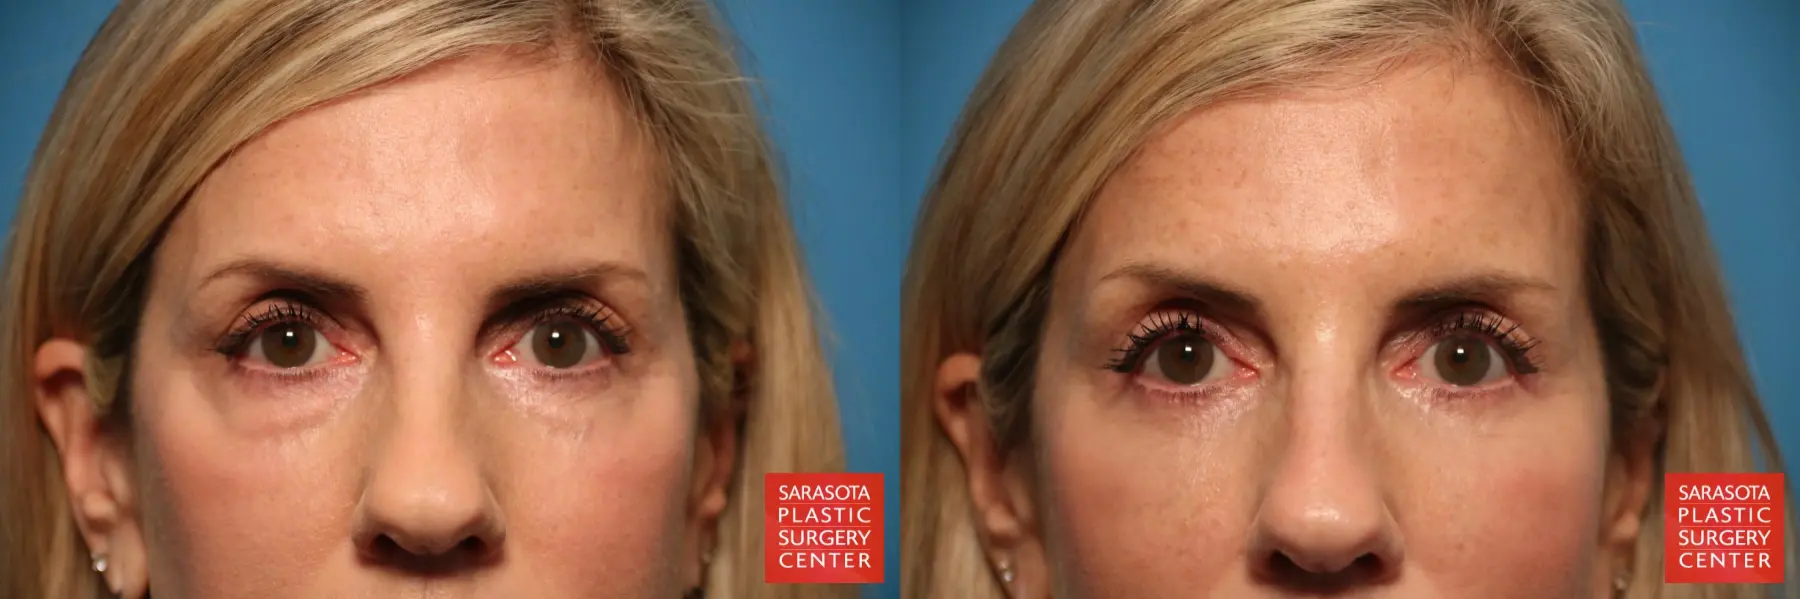 Eyelid Surgery: Patient 10 - Before and After  